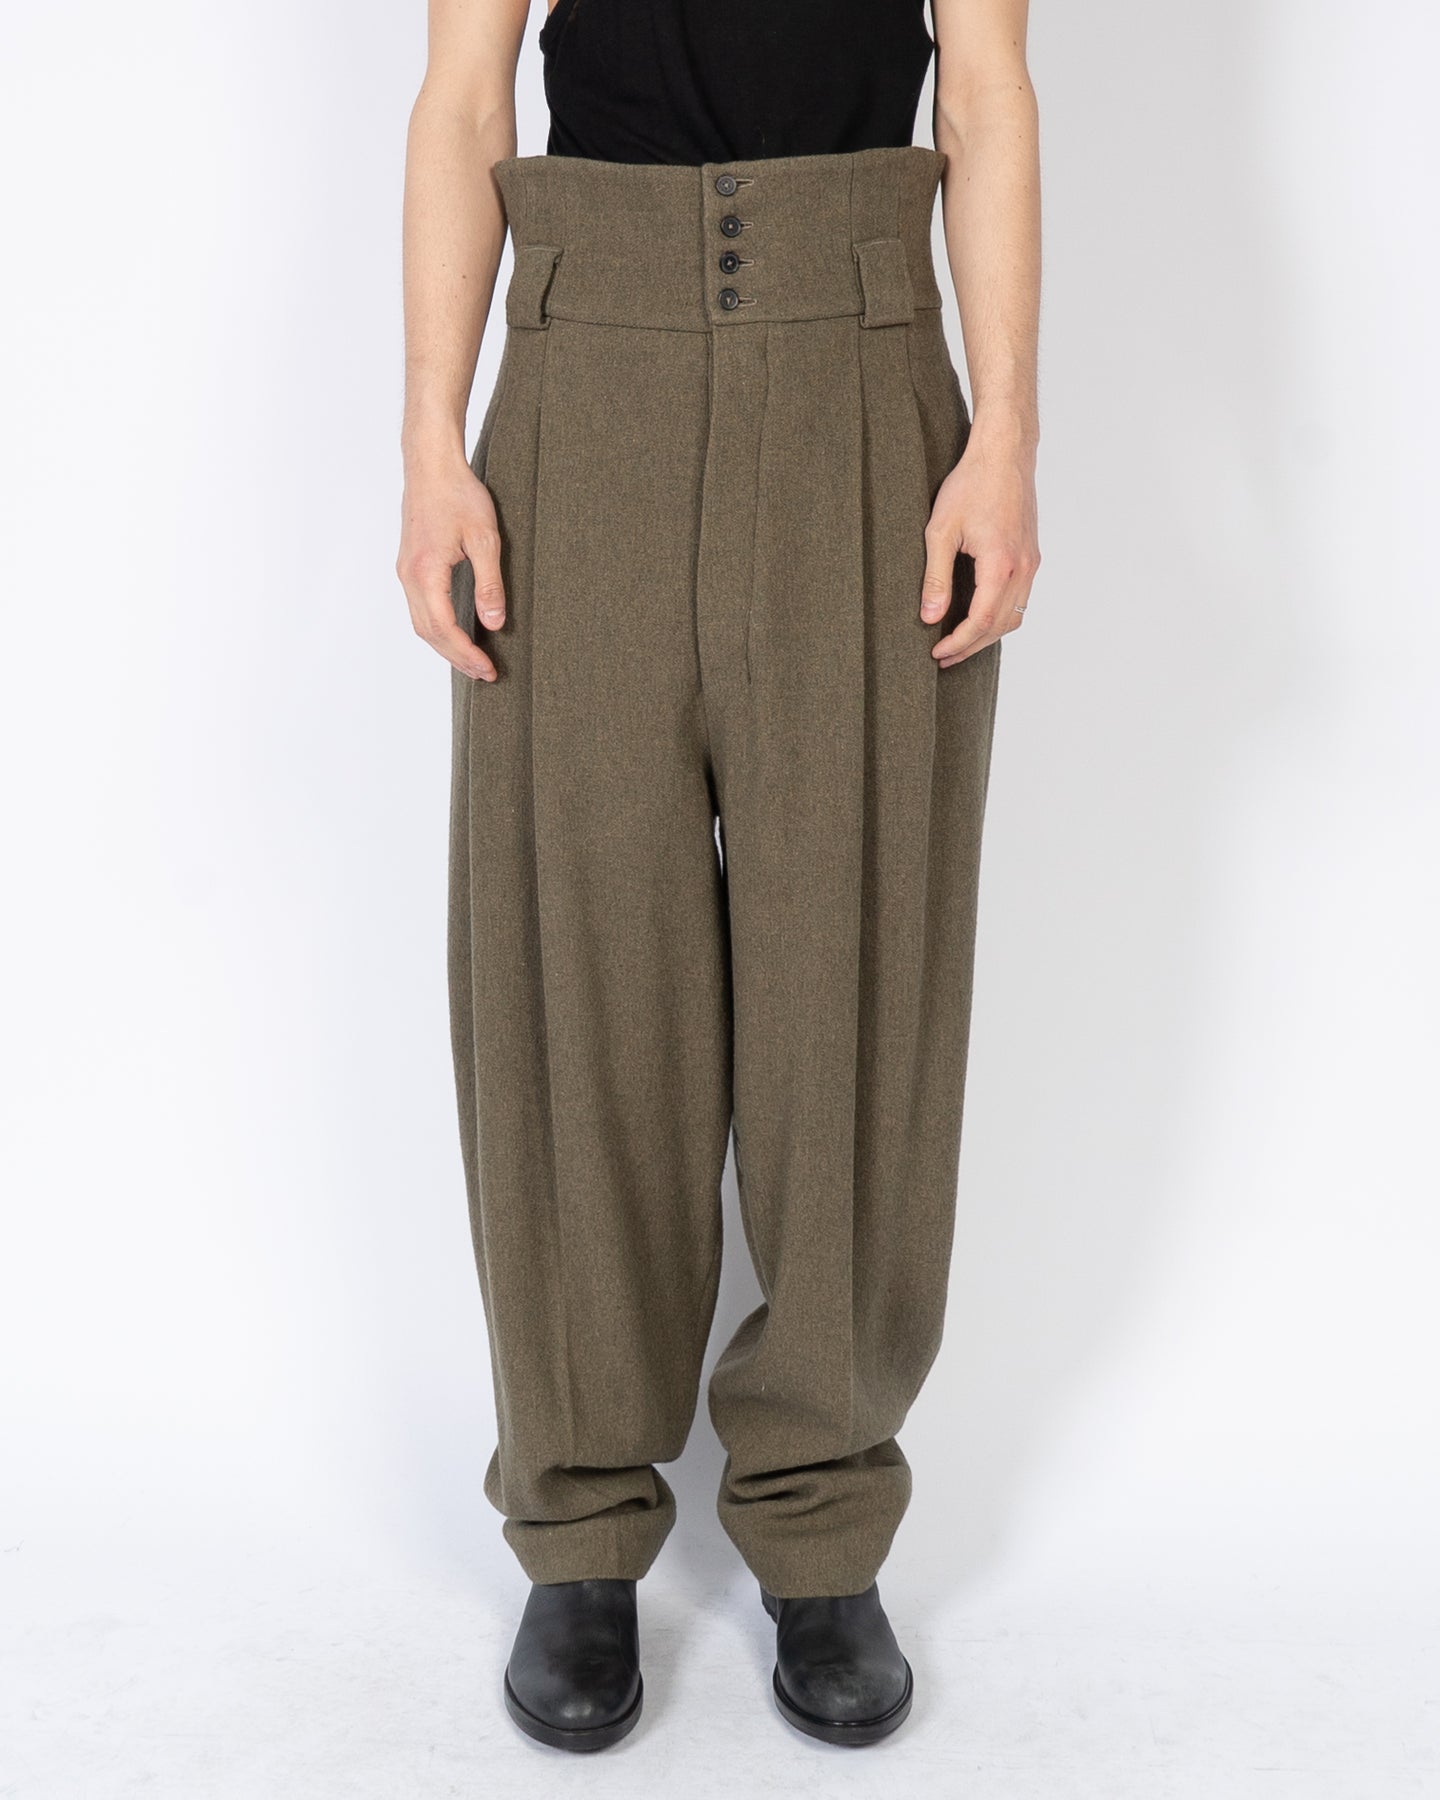 FW20 Olive Oversized Pleated Trousers 1 of 1 Sample